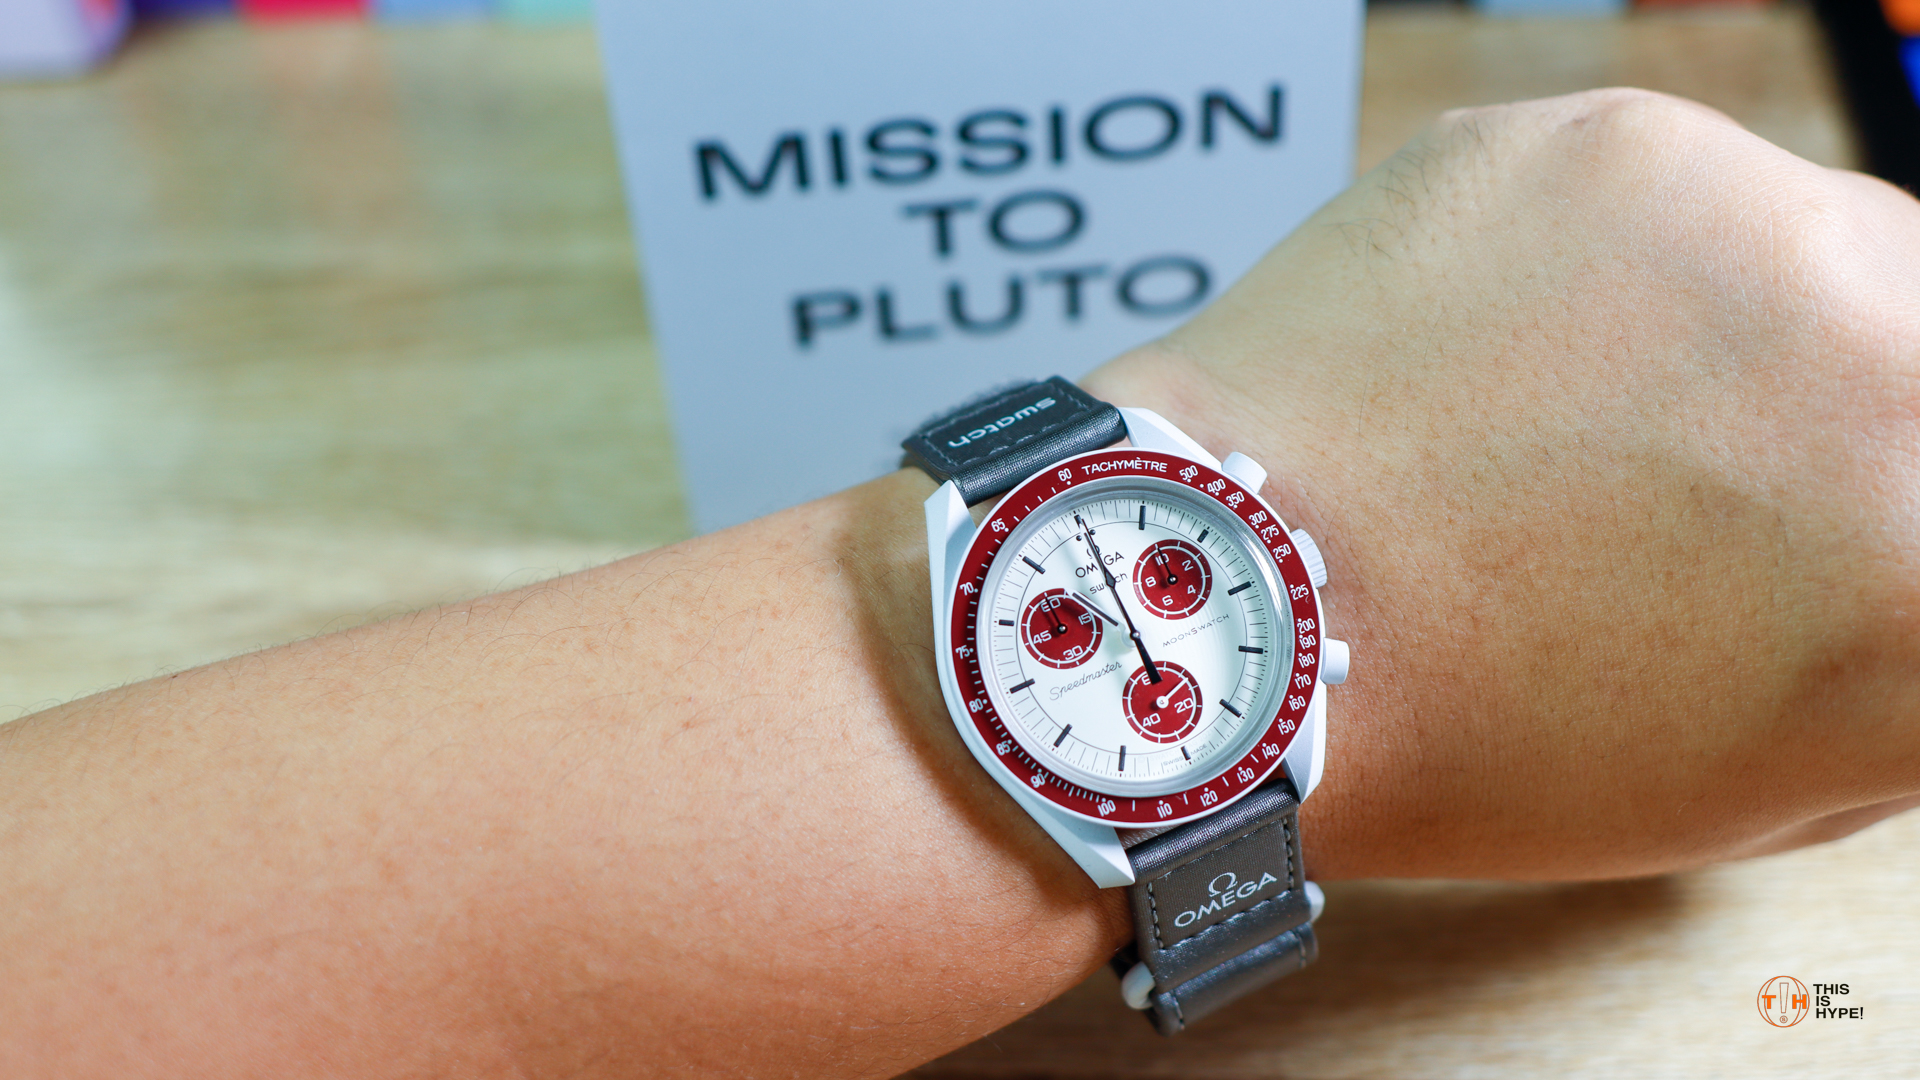 Swatch Omega Moonswatch Mission to Pluto | angeloawards.com